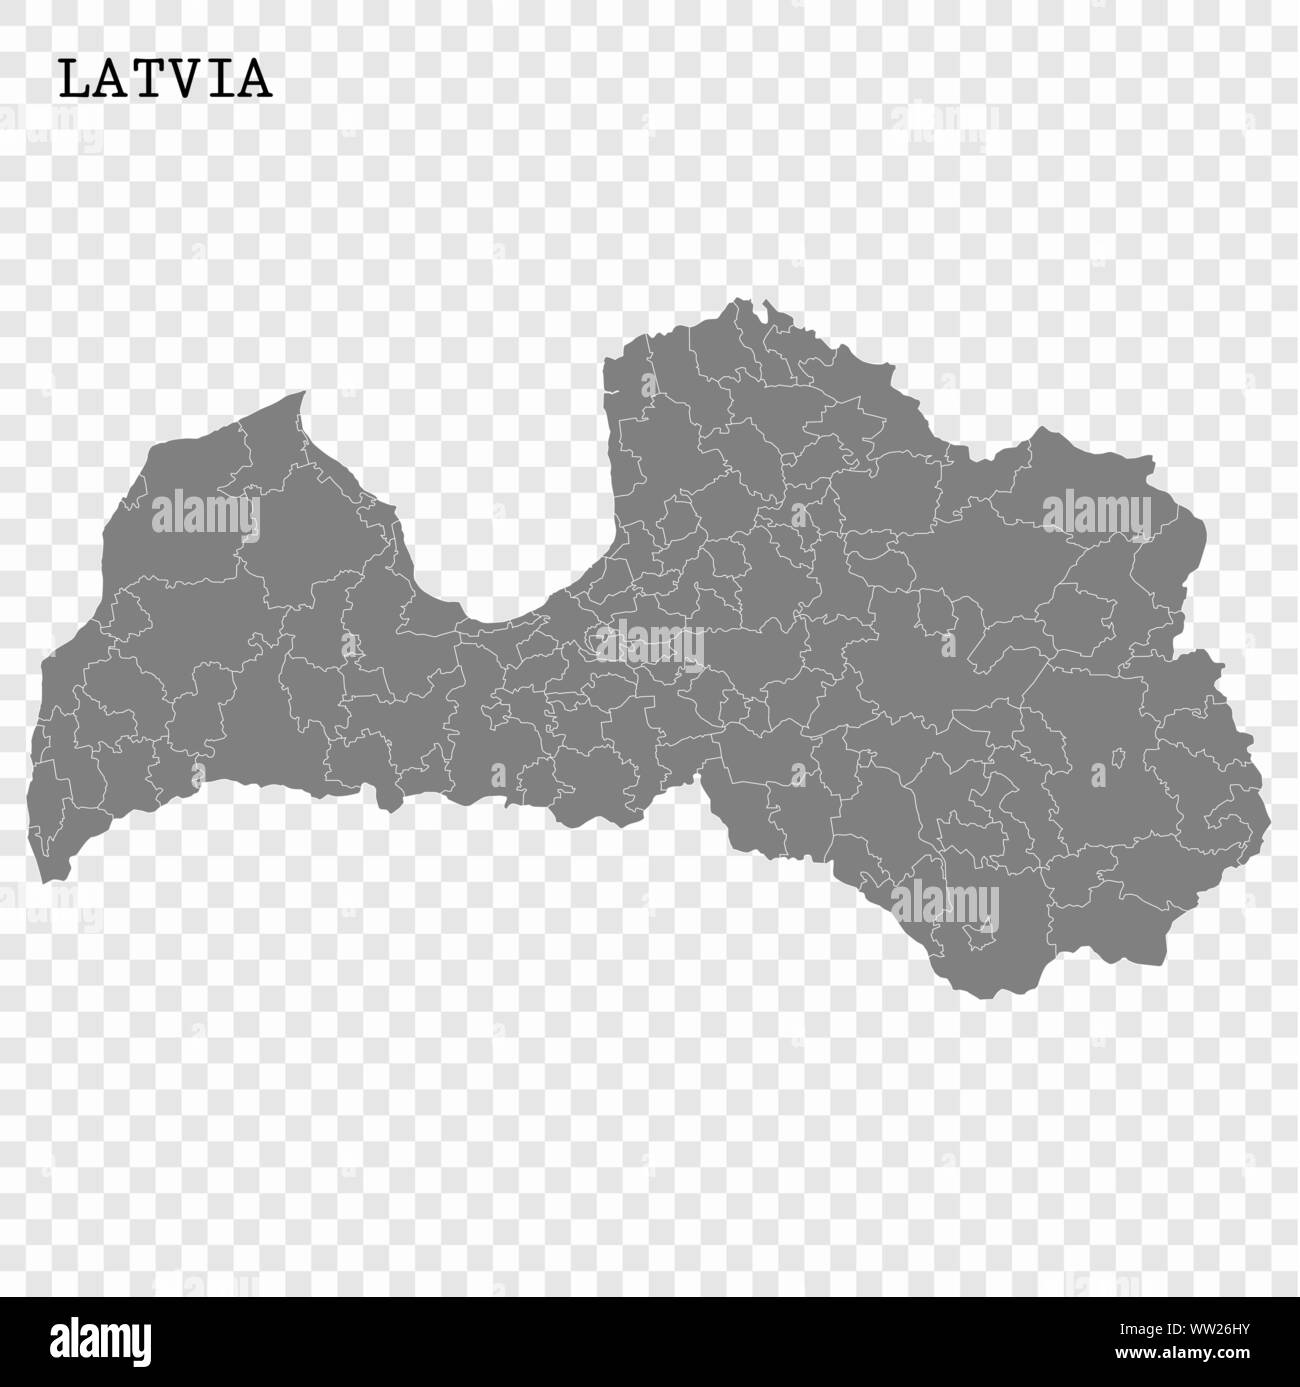 High quality map of Latvia with borders of the regions Stock Vector